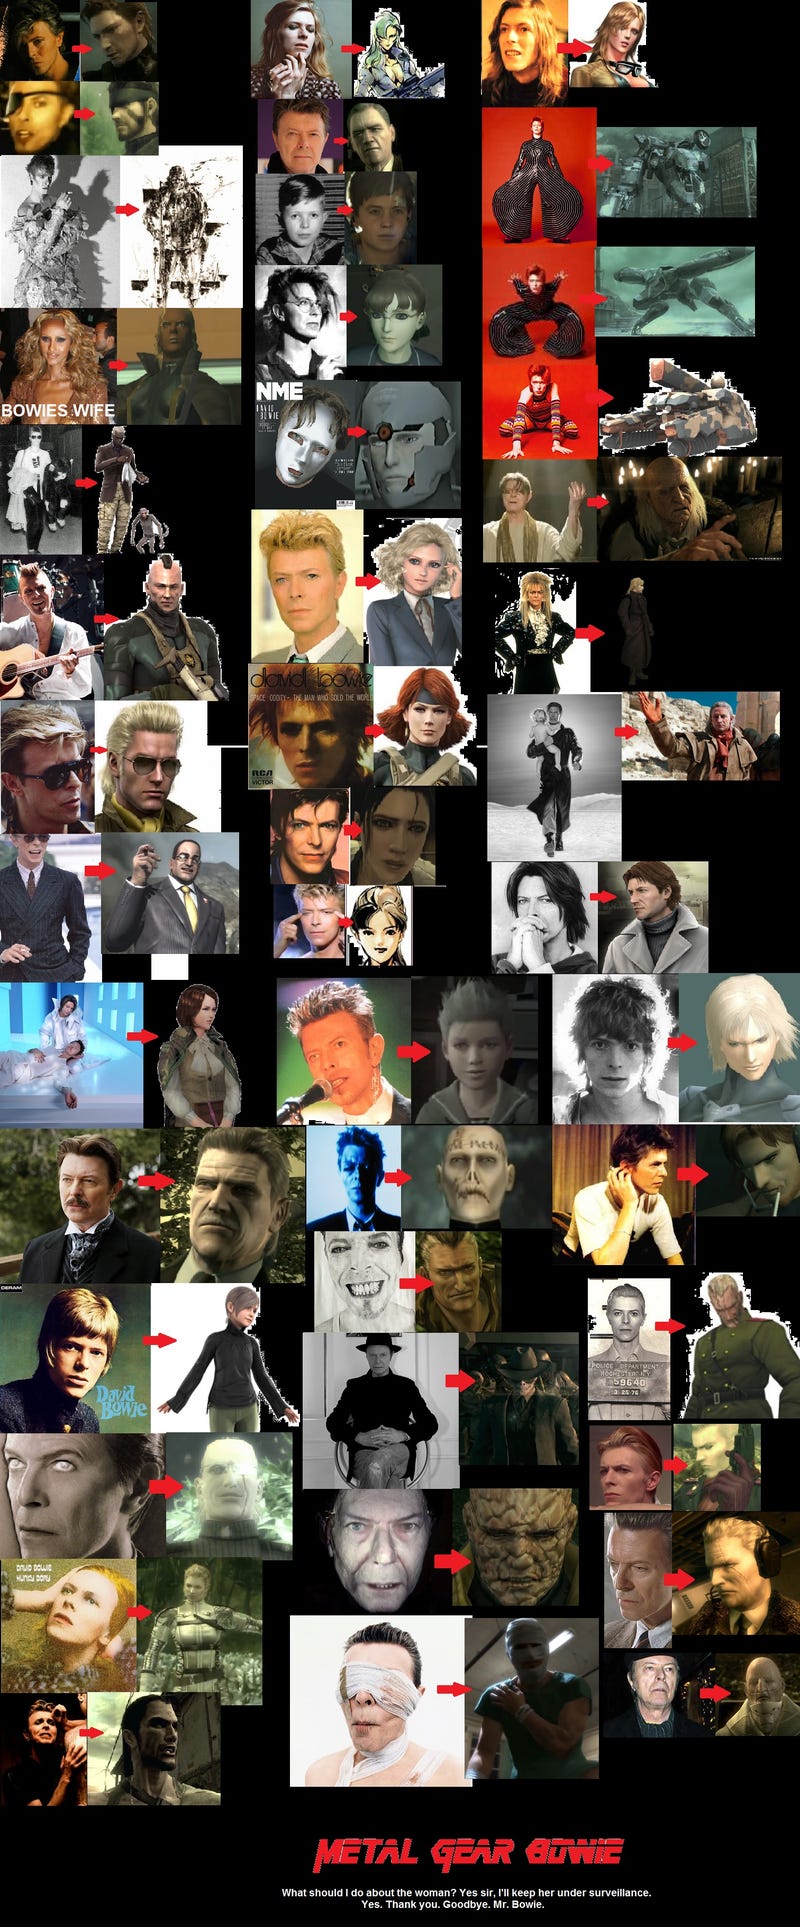 Metal Gear Solid 1: Every Main Character's Age, Height, And Birthday